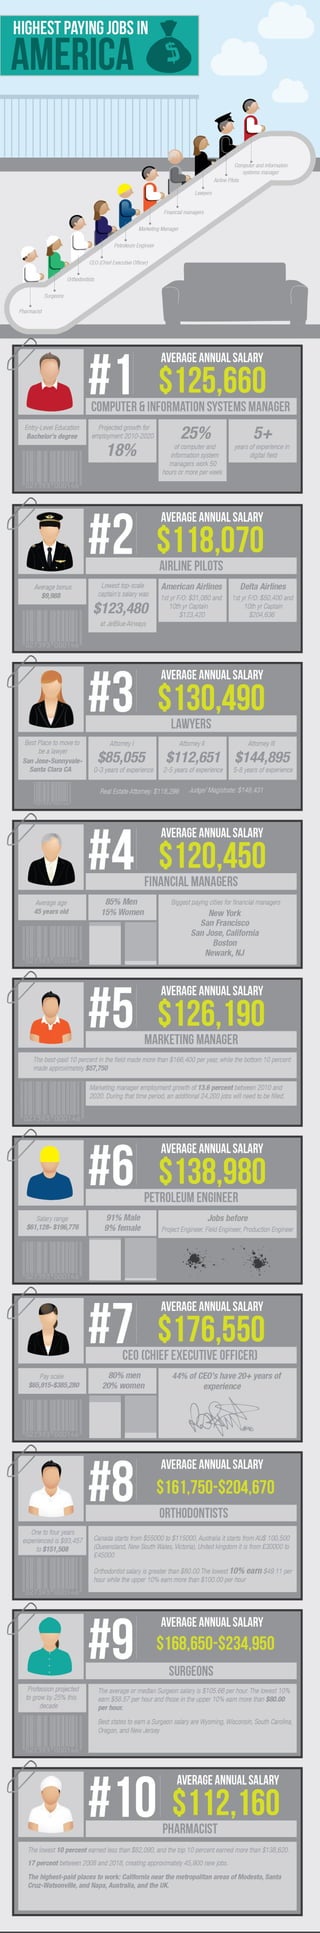 Highest paying-jobs-in-america